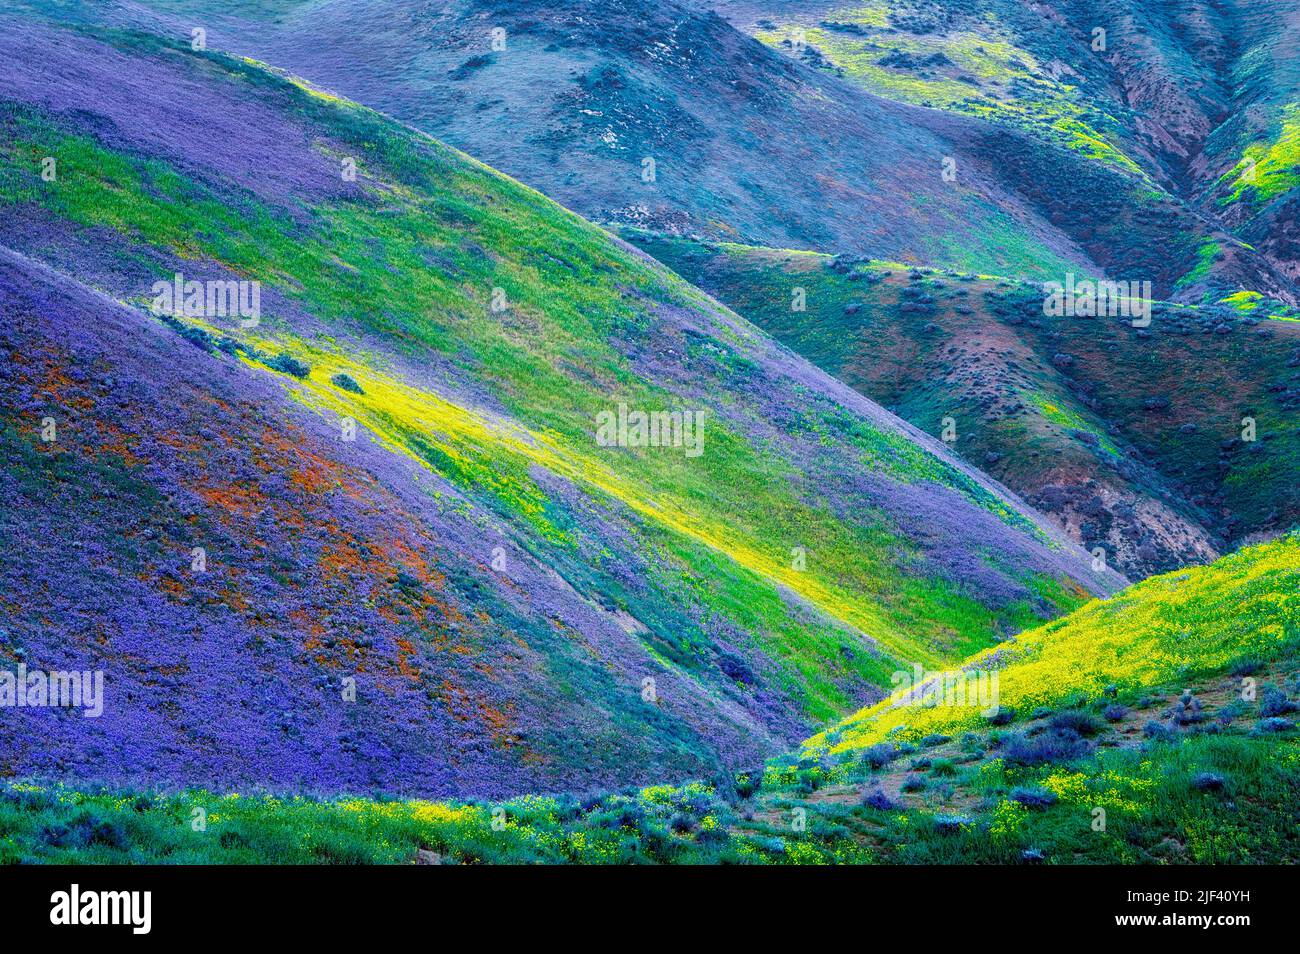 Hilside with yellow and purple wildflowers, Carrizo Plain National Monument, California Stock Photo